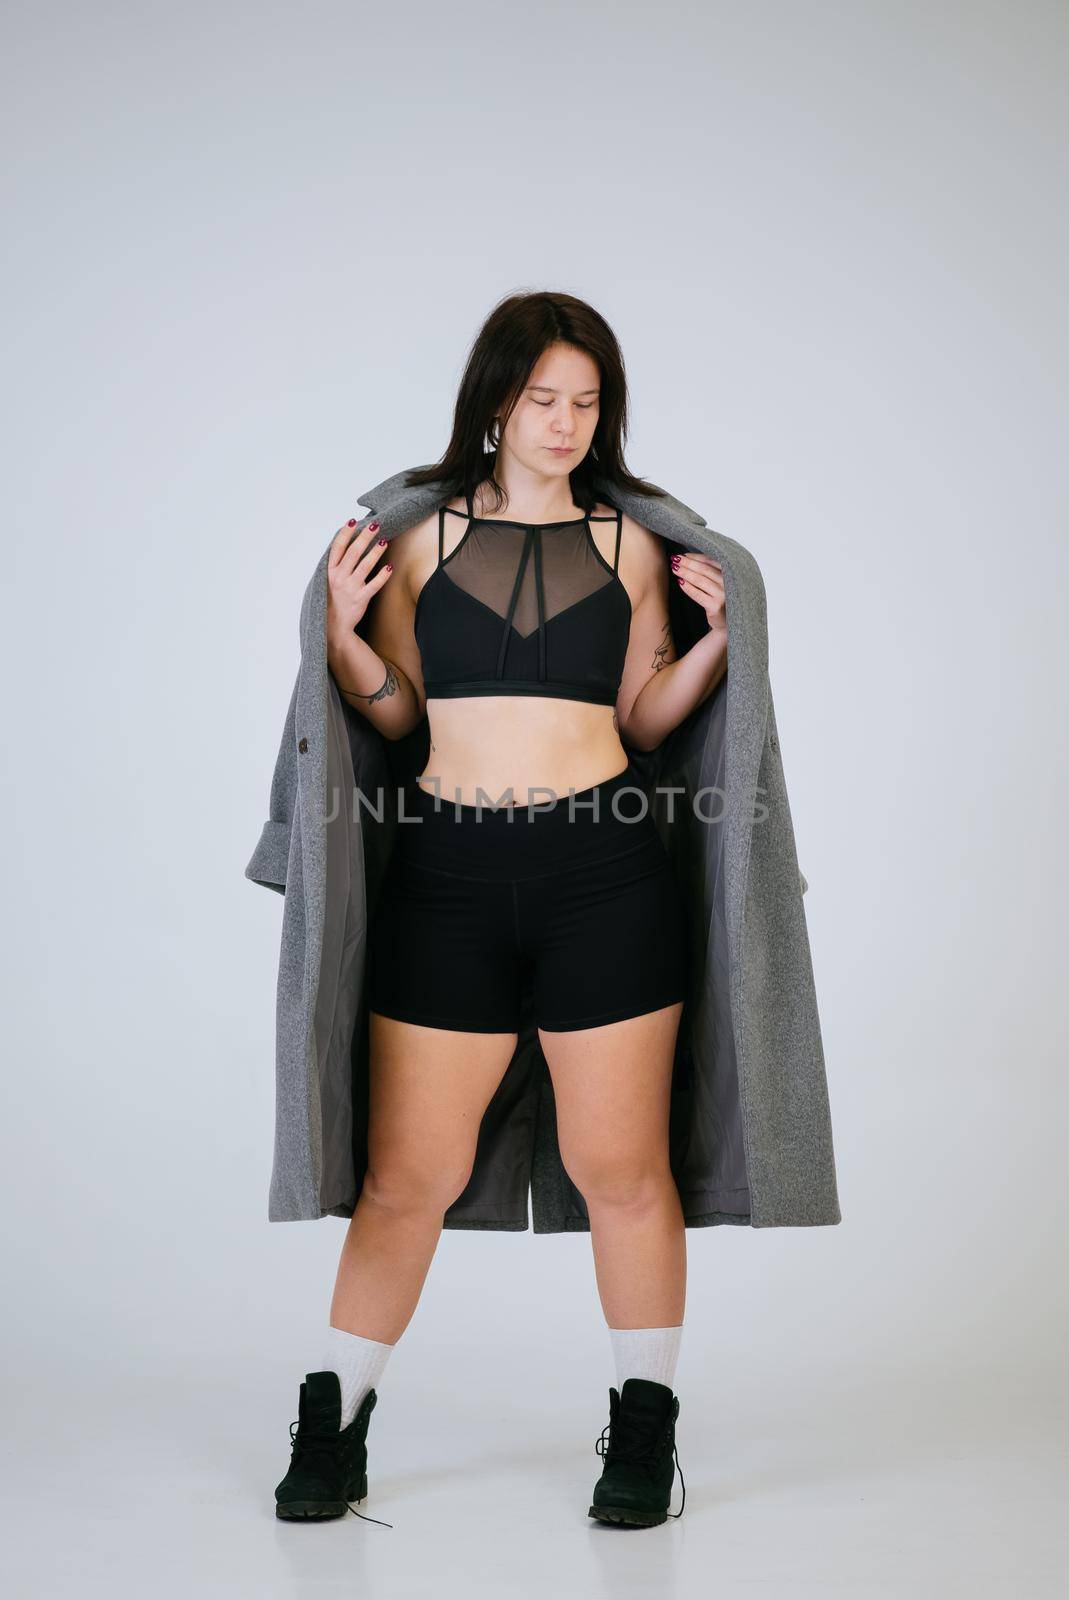 Plus size body positive woman wearing comfortable underwear and coat